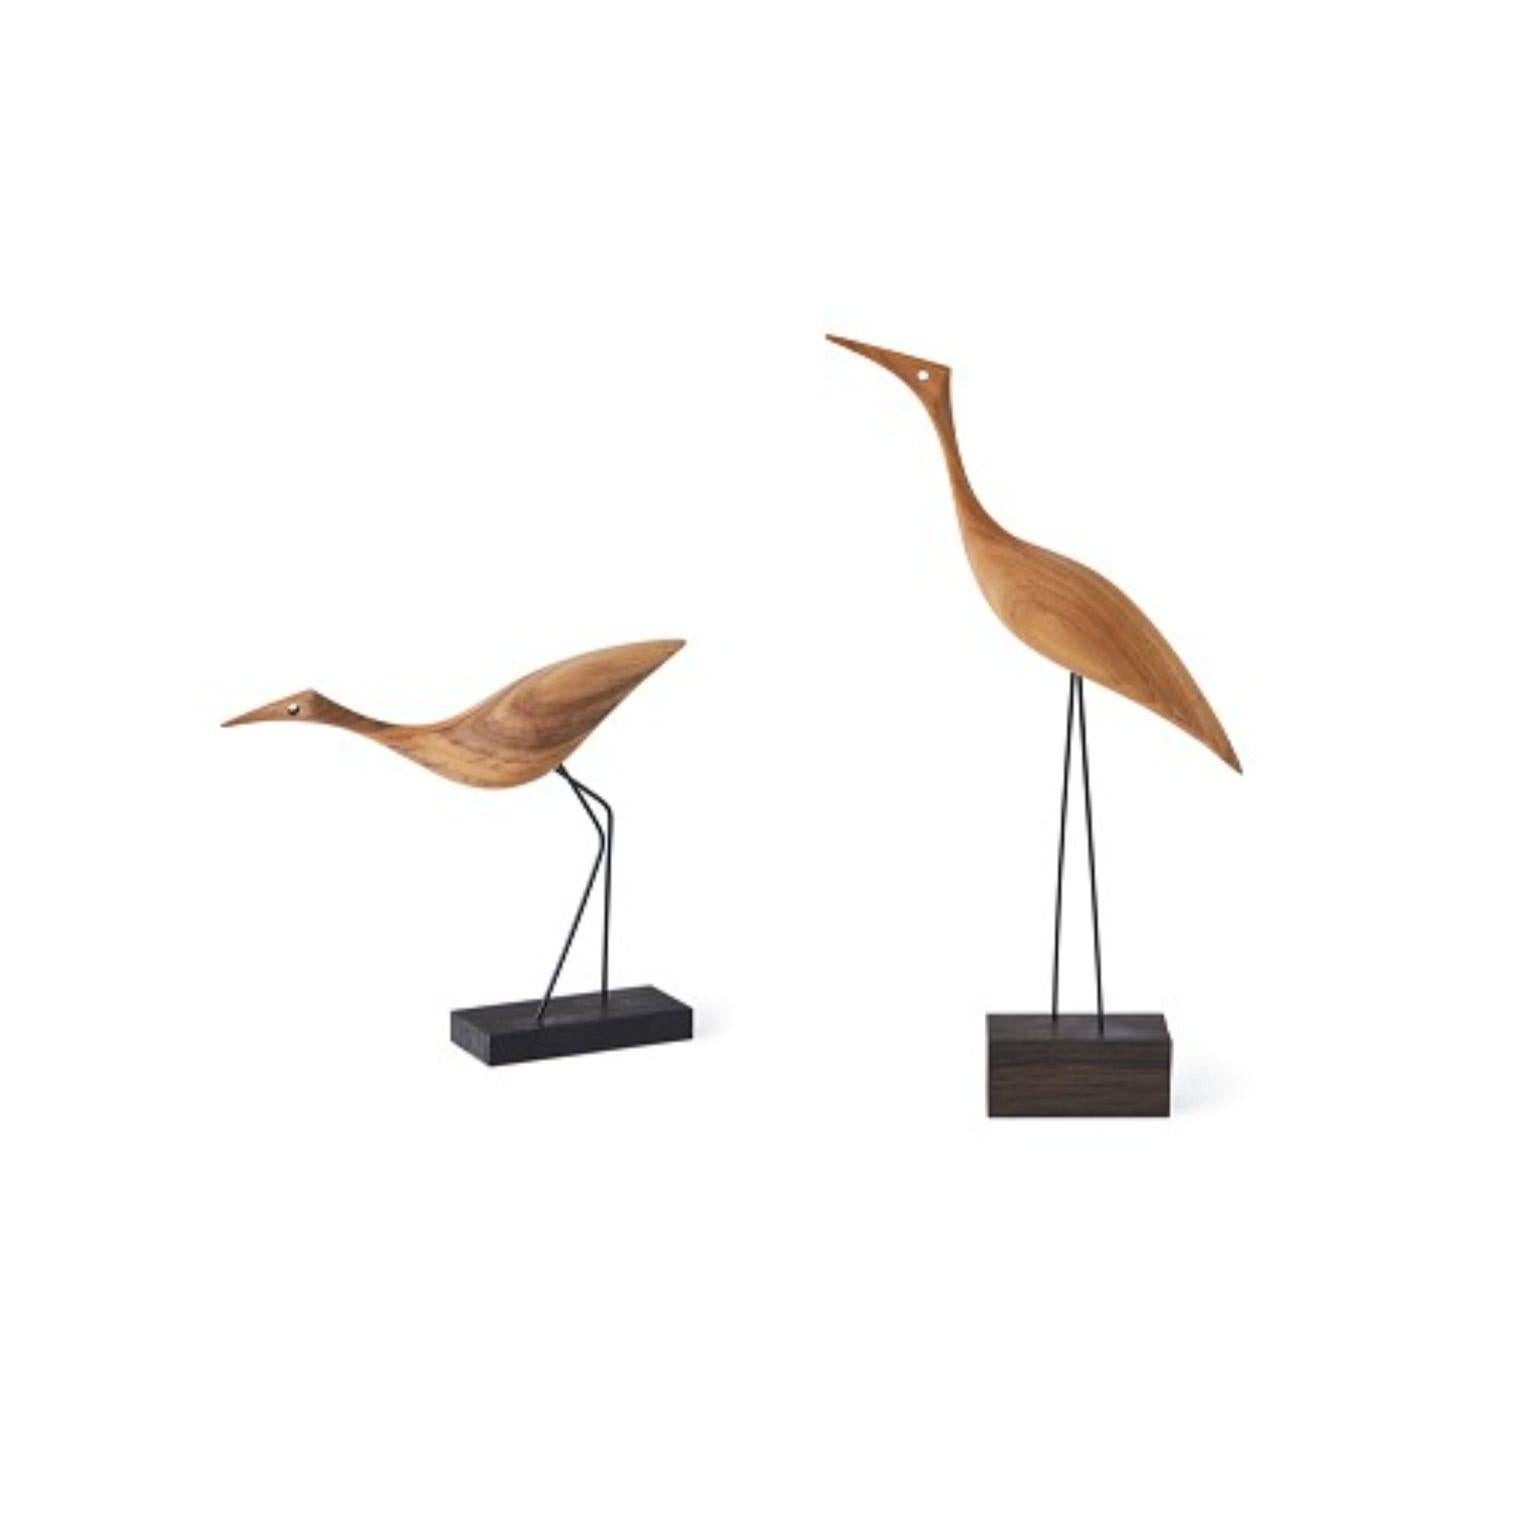 Set of 2 beak birds sculptures by Warm Nordic
Dimensions: 
Tall: D19 x W5,5 x H36 cm
Low: S20,5 x W5 x H19 cm
Material: Oiled Oak
Weight: 0.2 kg each
Also available in different variations.

Designed by Svend Aage Holm-Sørensen in 1961.

Charming